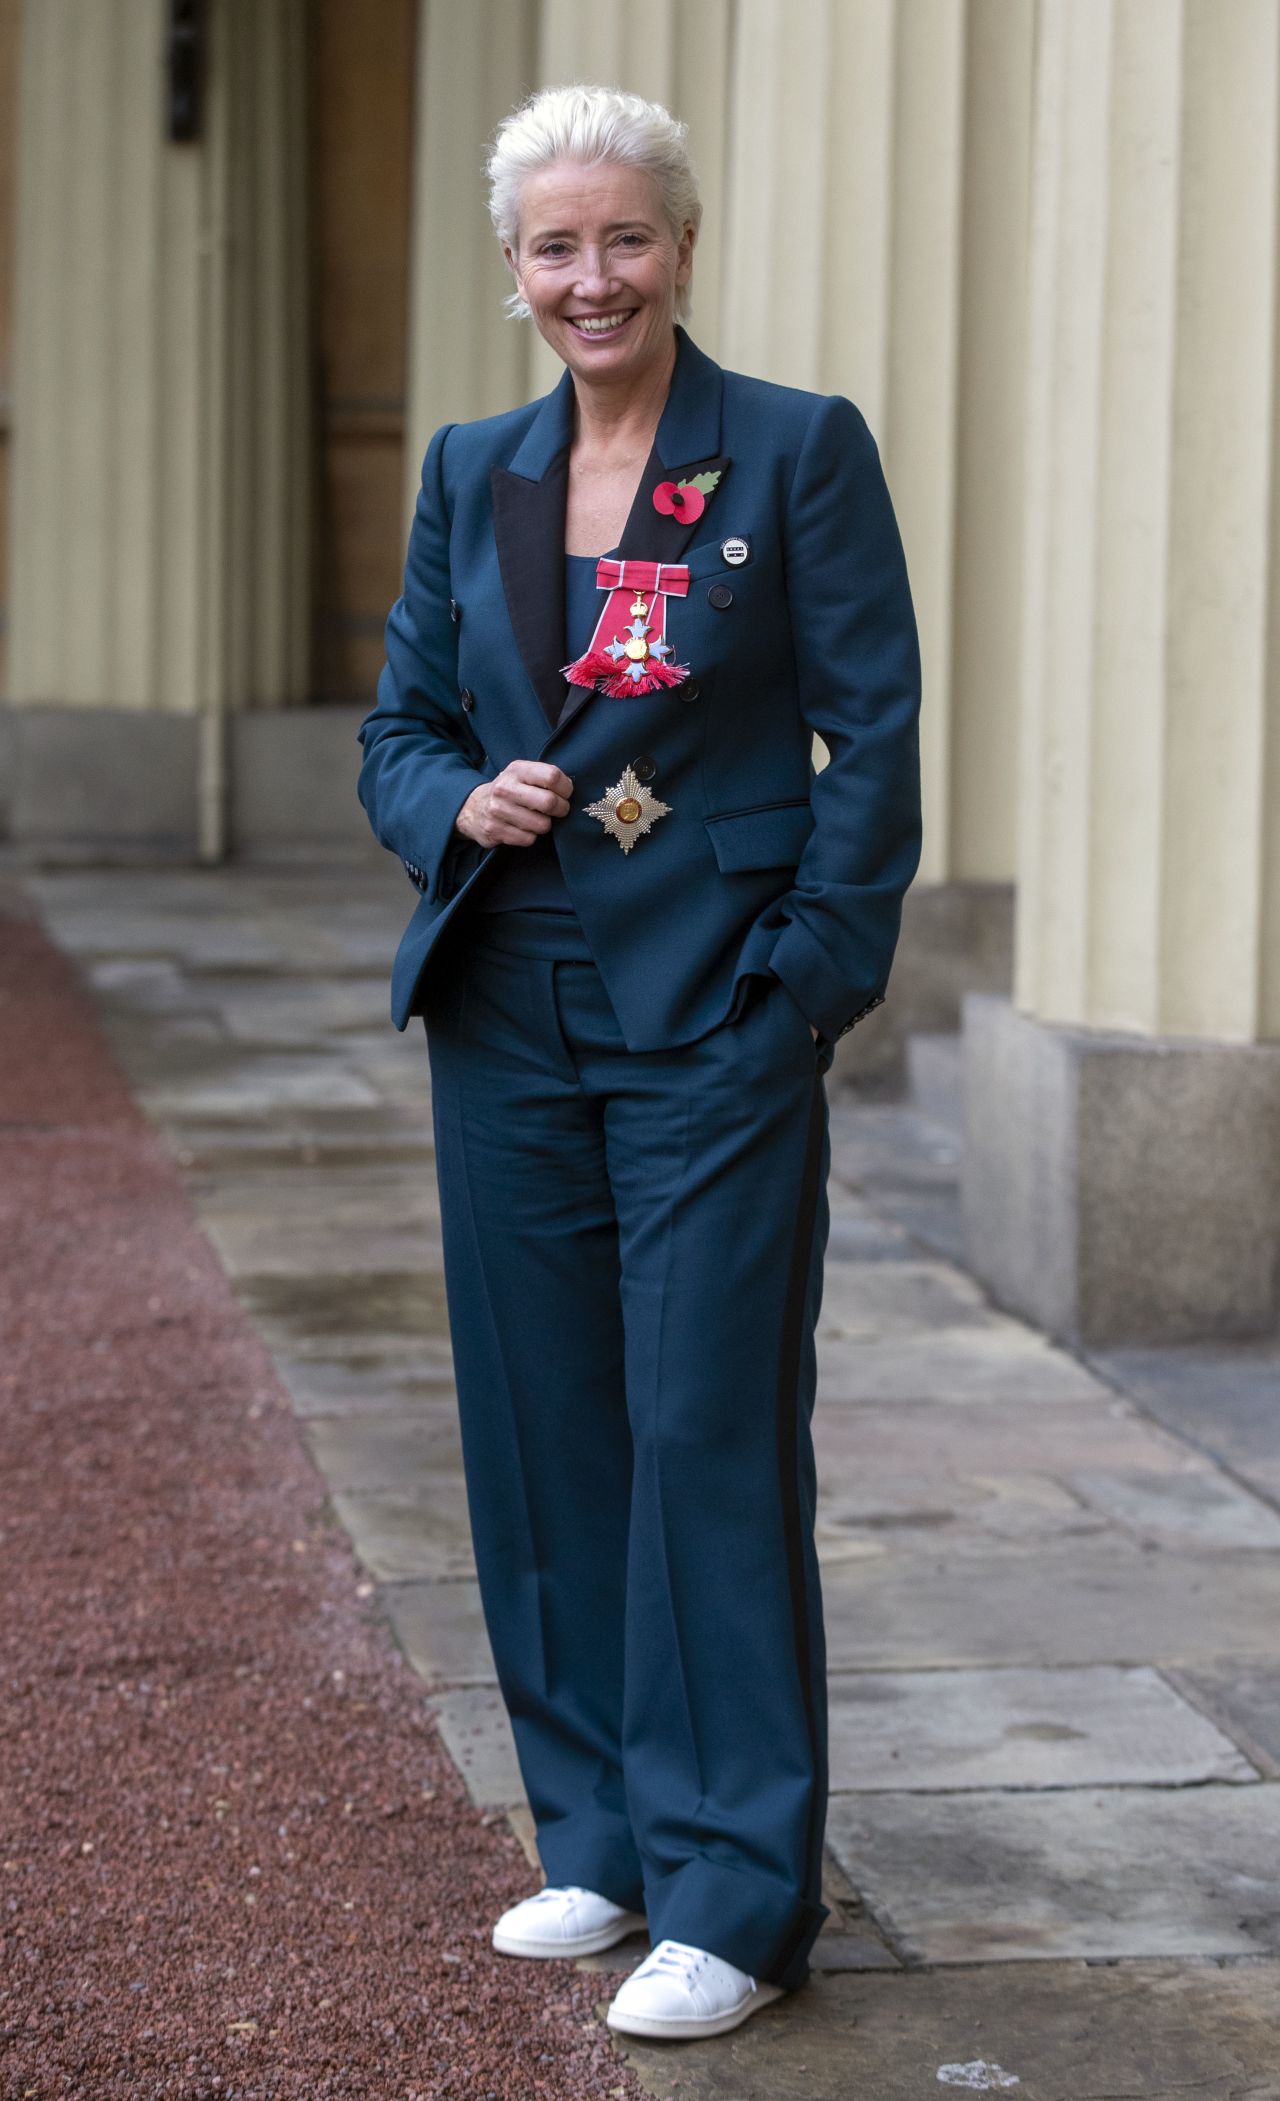 Actress Emma Thompson leaves Buckingham Palace after receiving her damehood at an Investiture ceremony on November 7, 2018 in London. Thompson received the accolade in recognition of her services to drama.